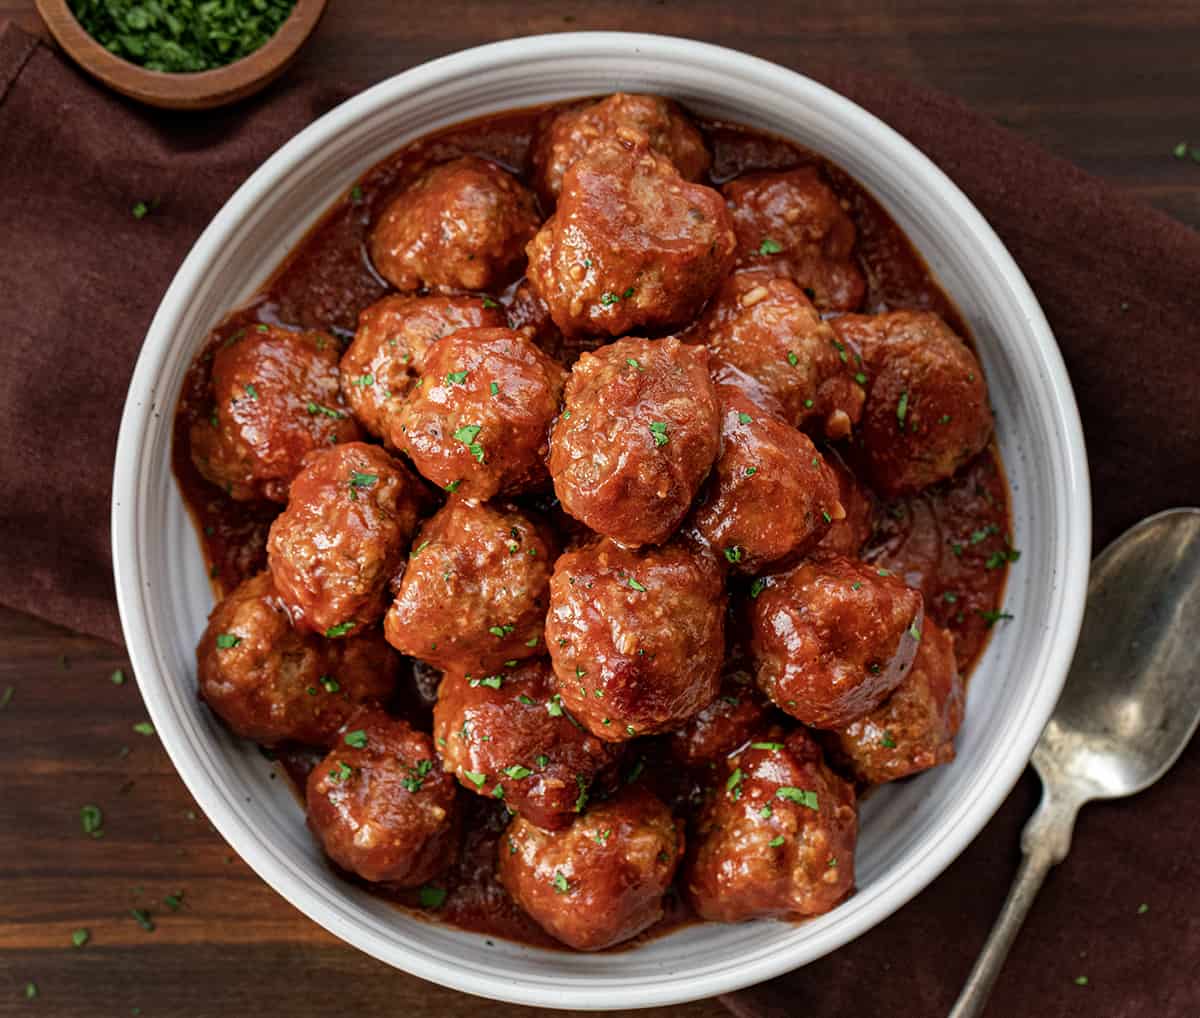 Bowl of Slow Cooker Cranberry Meatballs from Overhead with a Spoon Next to Bowl on Cutting Board.